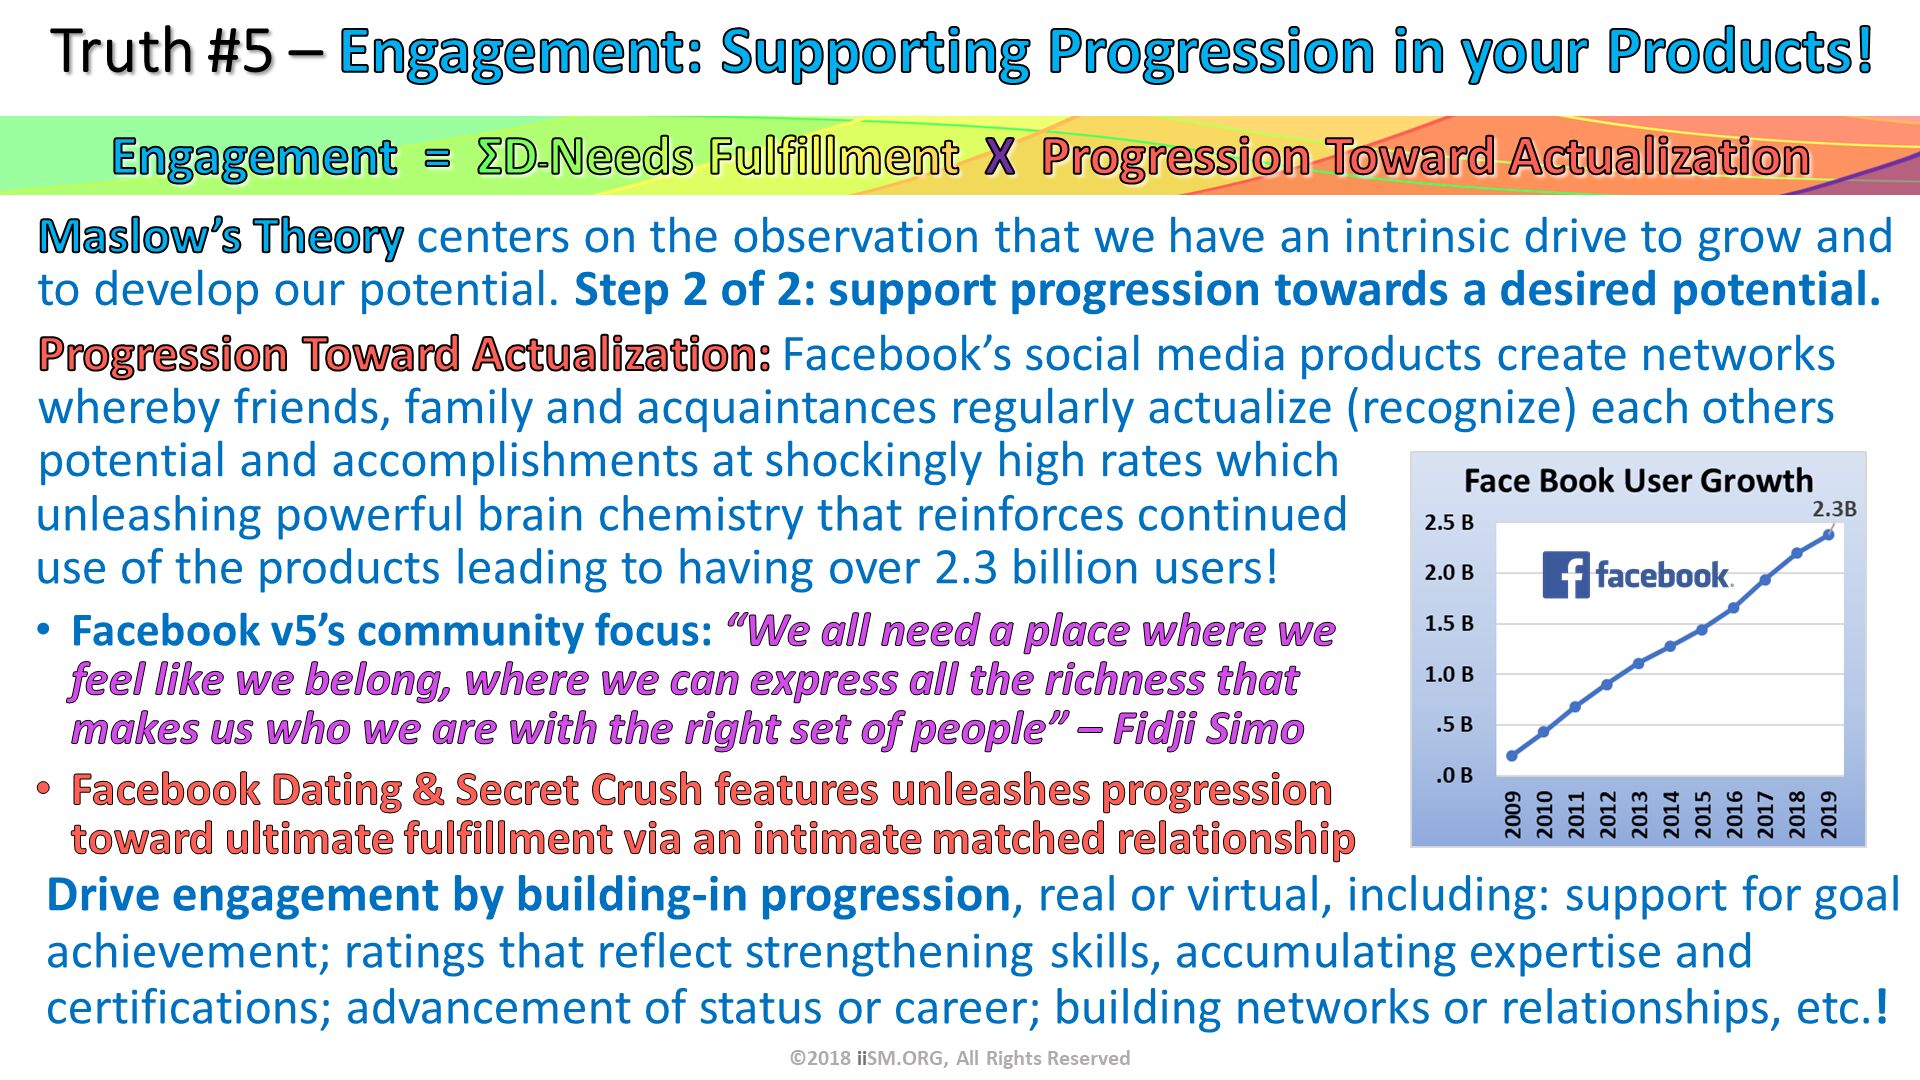 ©2018 iiSM.ORG, All Rights Reserved. 
. Maslow’s Theory centers on the observation that we have an intrinsic drive to grow and to develop our potential. Step 2 of 2: support progression towards a desired potential.
Progression Toward Actualization: Facebook’s social media products create networks whereby friends, family and acquaintances regularly actualize (recognize) each others potential and accomplishments at shockingly high rates which . unleashing powerful brain chemistry that reinforces continued use of the products leading to having over 2.3 billion users!
Facebook v5’s community focus: “We all need a place where we feel like we belong, where we can express all the richness that makes us who we are with the right set of people” – Fidji Simo
Facebook Dating & Secret Crush features unleashes progression toward ultimate fulfillment via an intimate matched relationship. Drive engagement by building-in progression, real or virtual, including: support for goal achievement; ratings that reflect strengthening skills, accumulating expertise and certifications; advancement of status or career; building networks or relationships, etc.!. Truth #5 – Engagement: Supporting Progression in your Products! . Engagement  =  ΣD-Needs Fulfillment  X  Progression Toward Actualization. 